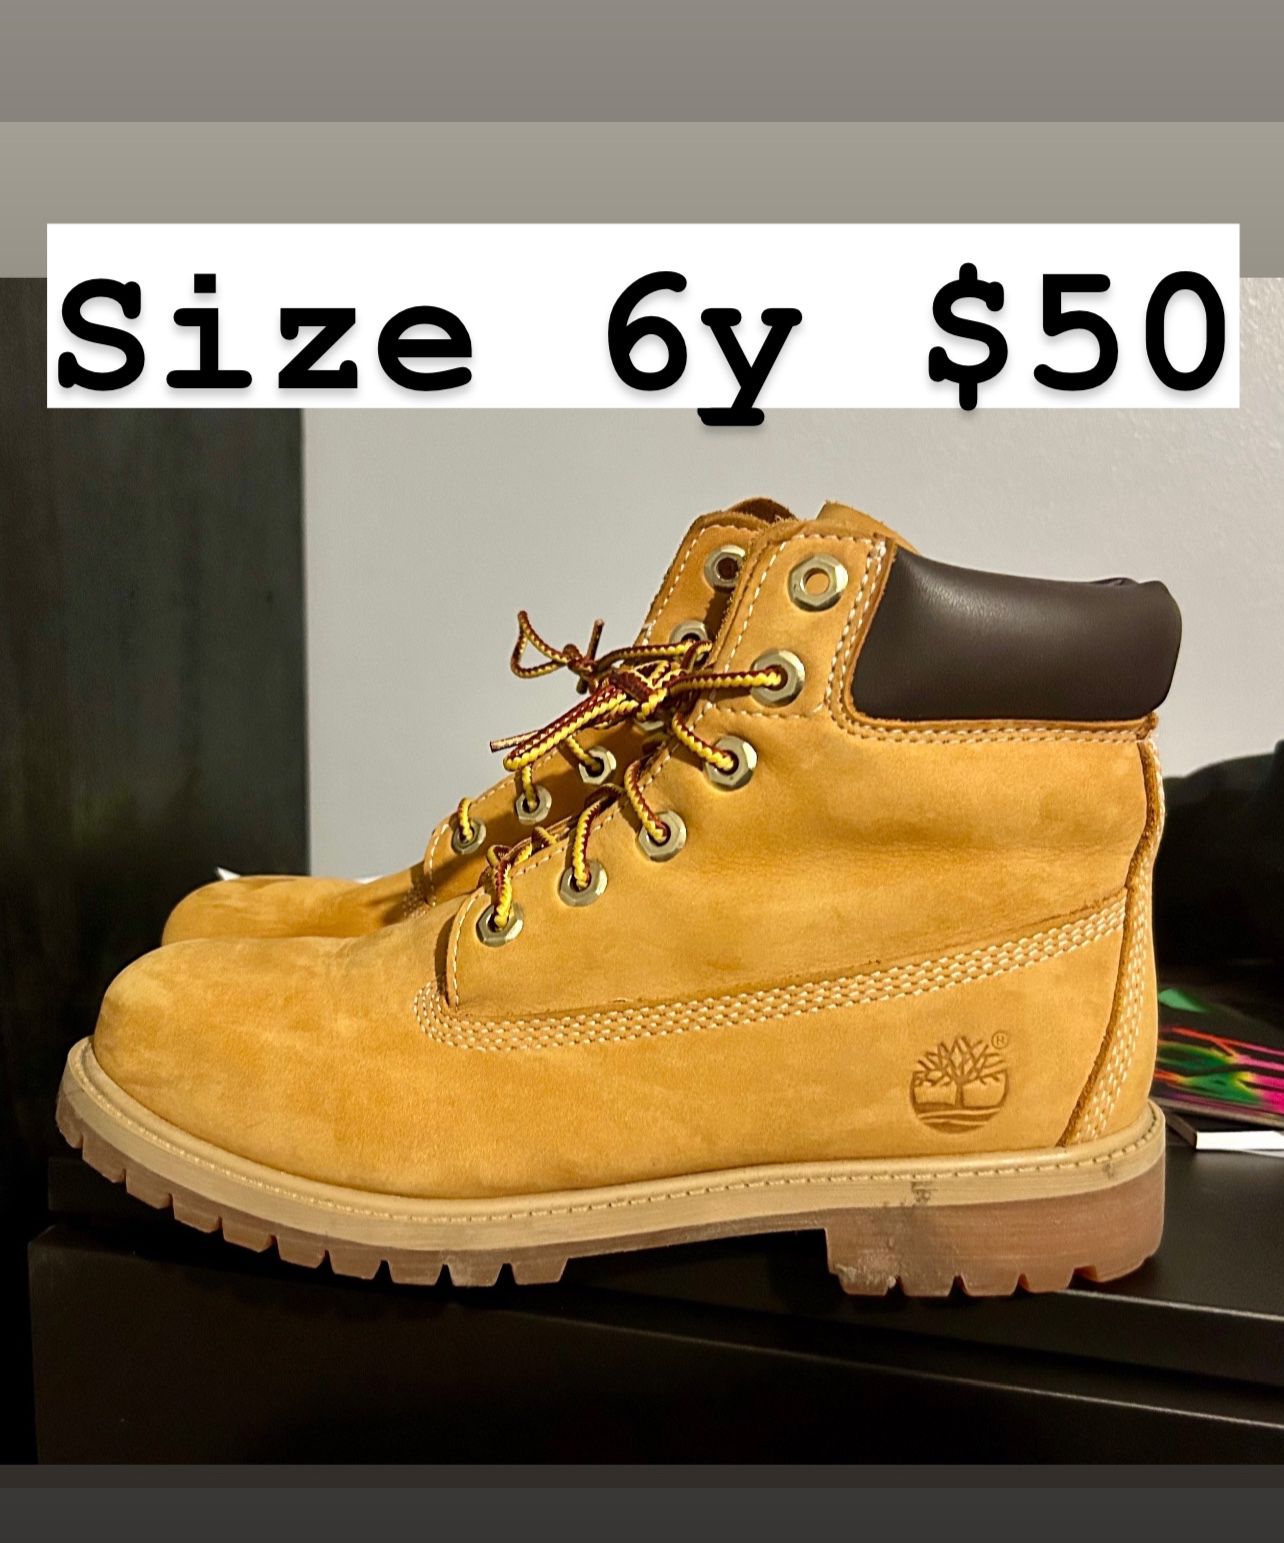 Timberlands Classics Size 6y Or Women’s 7.5